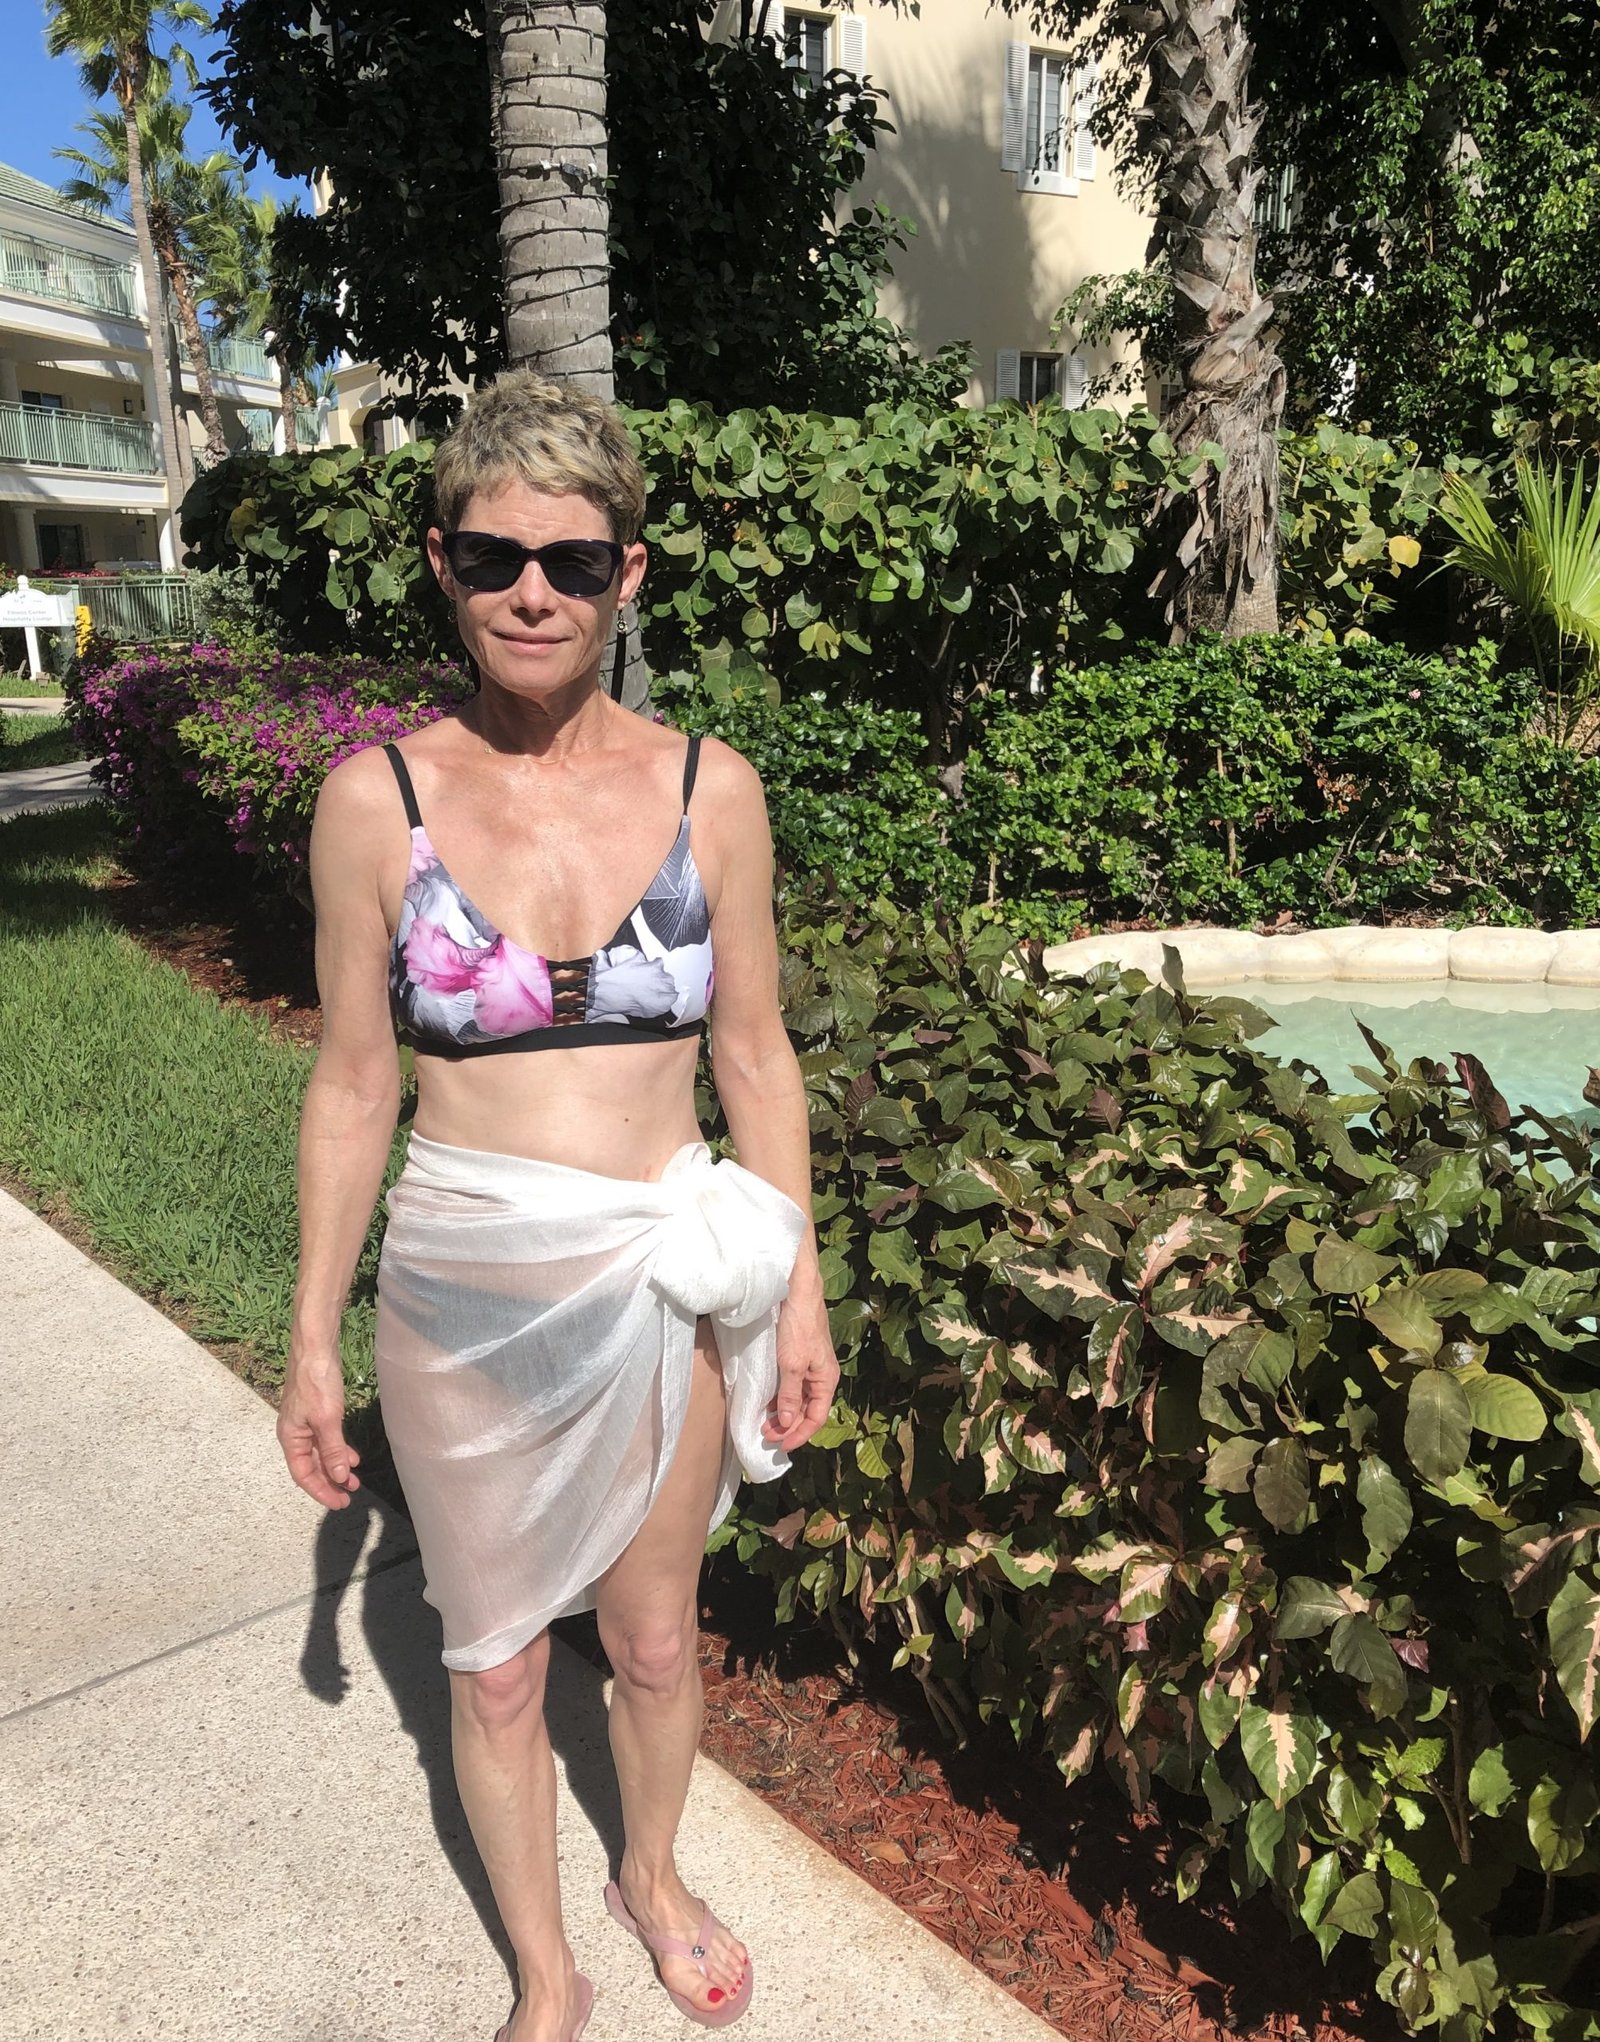 Older women can wear two-piece bathing-suits blog post.